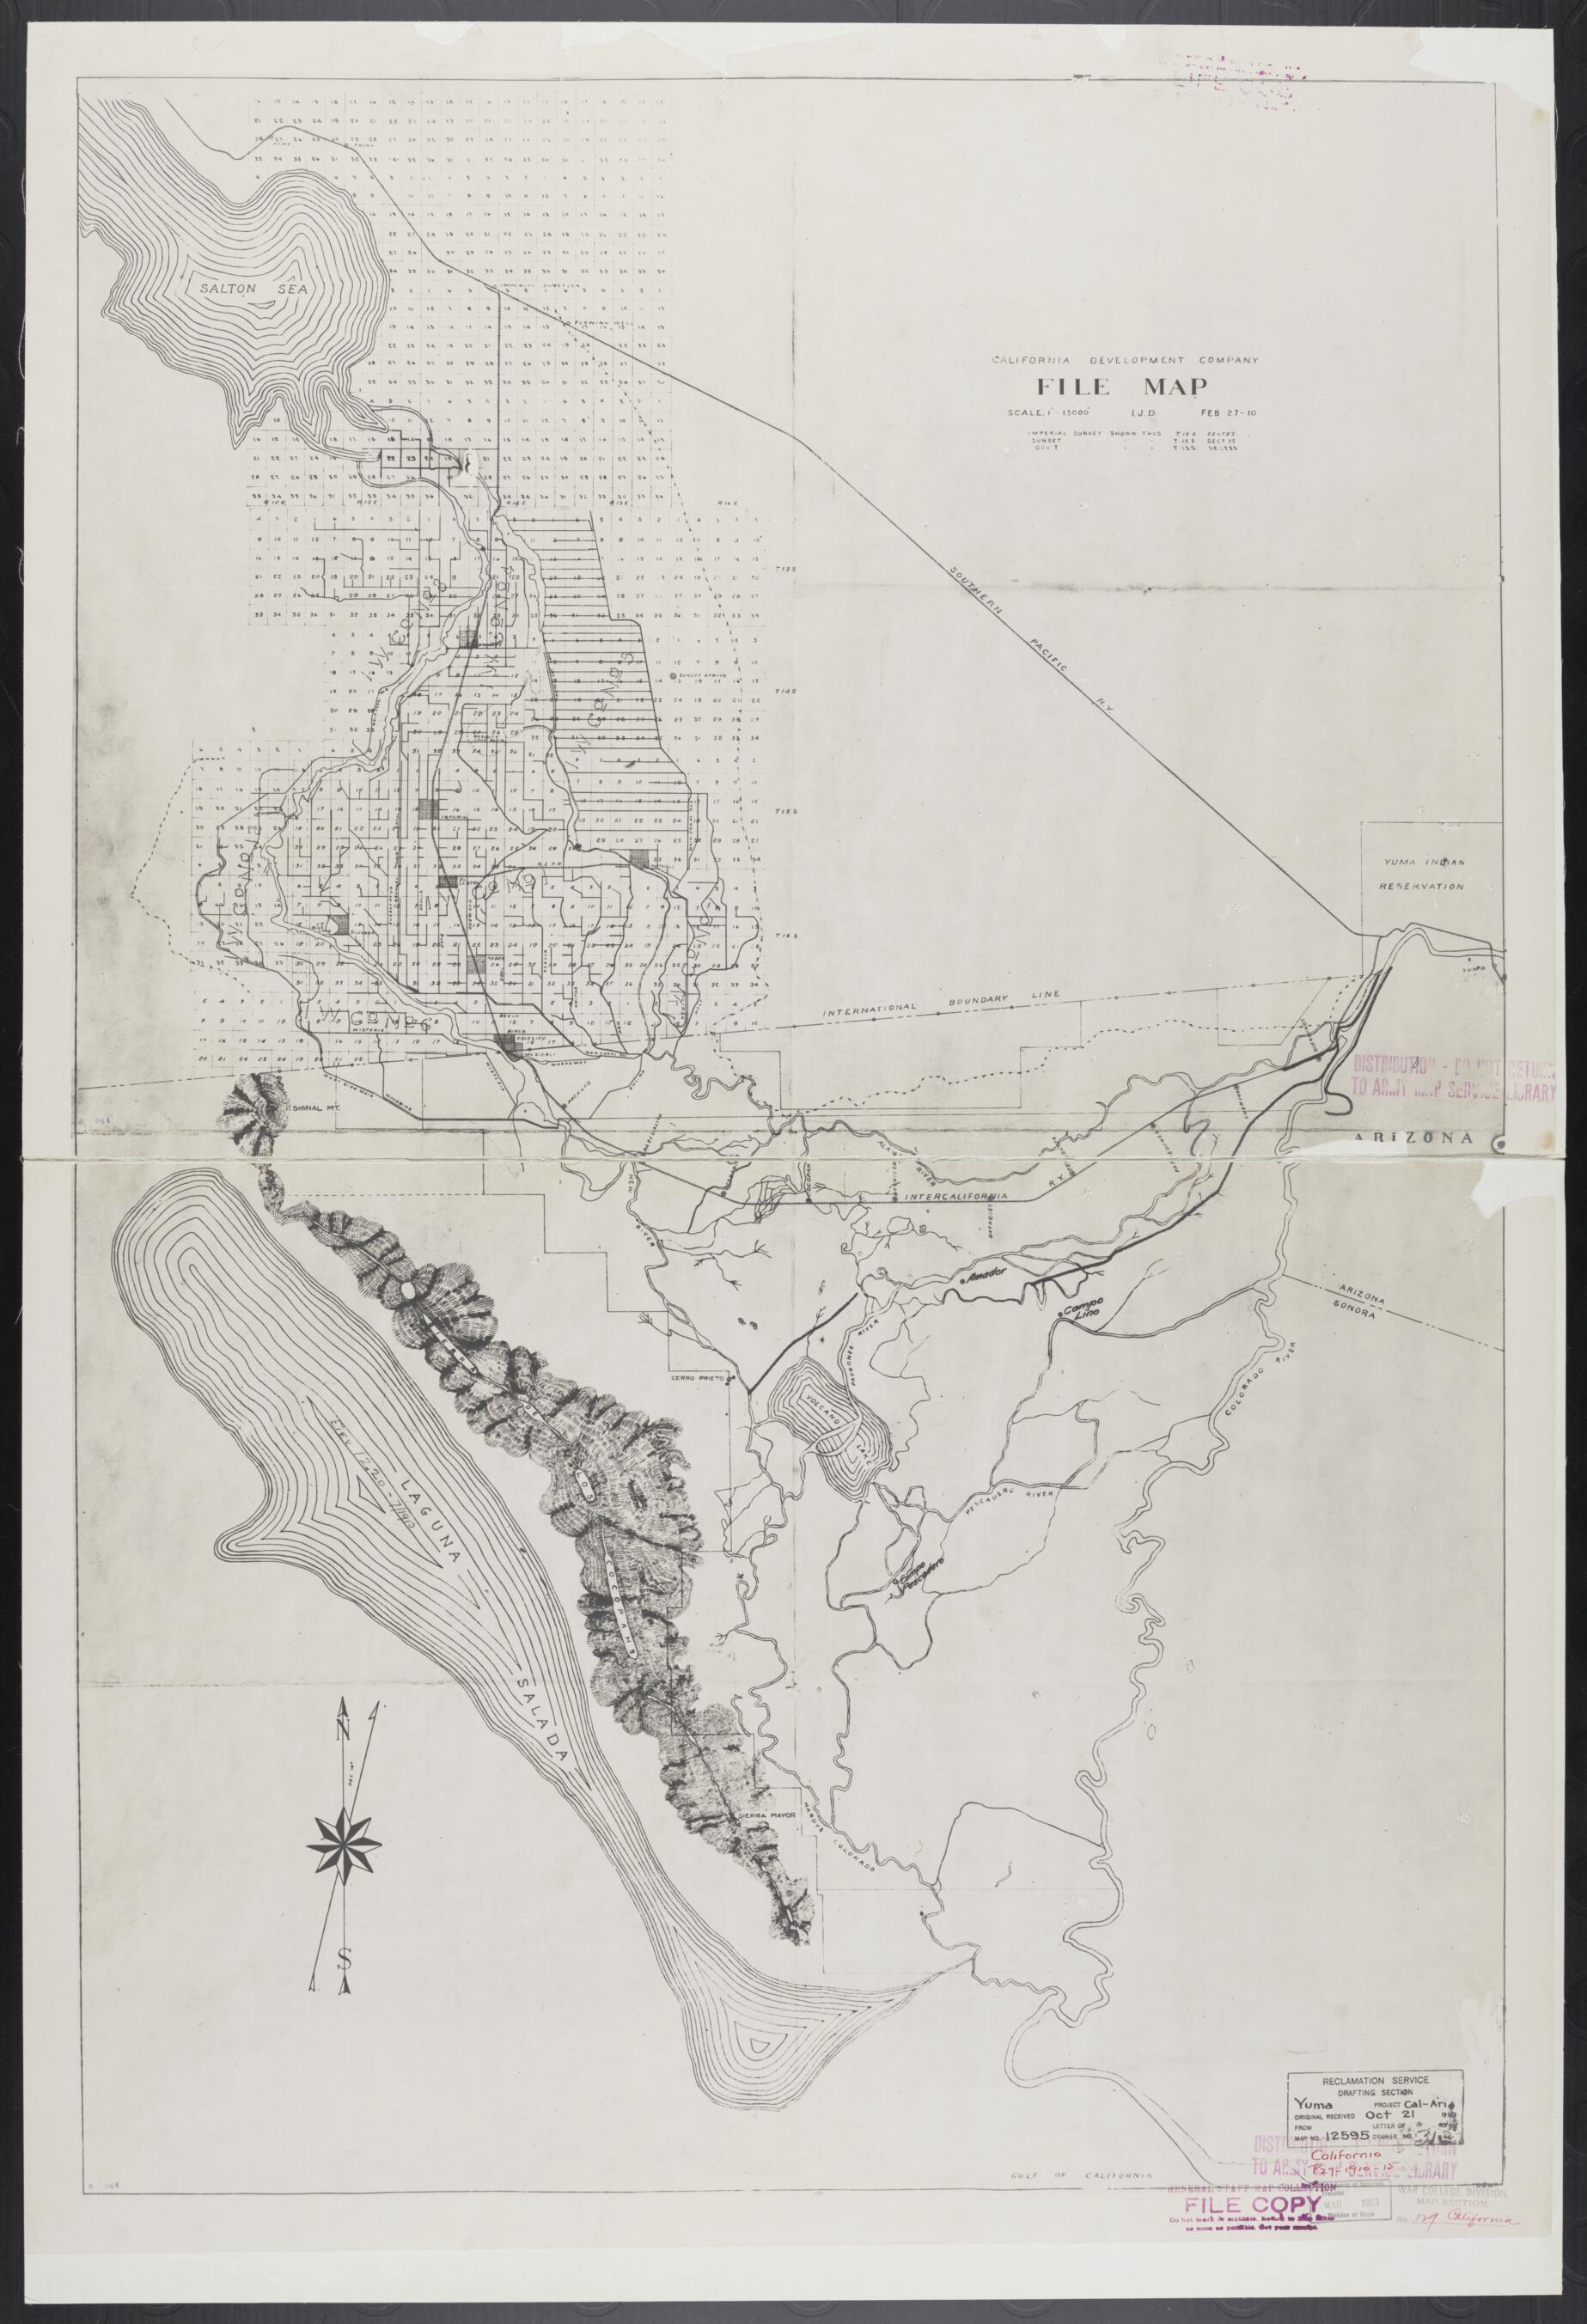 This old map of -various Subjects Raj--Reclamation 1934 (Alternate Supplied Title: California Title Collection Drawer 67, -various Subjects Raj--Reclamation 1934) from 1850 was created by  in 1850